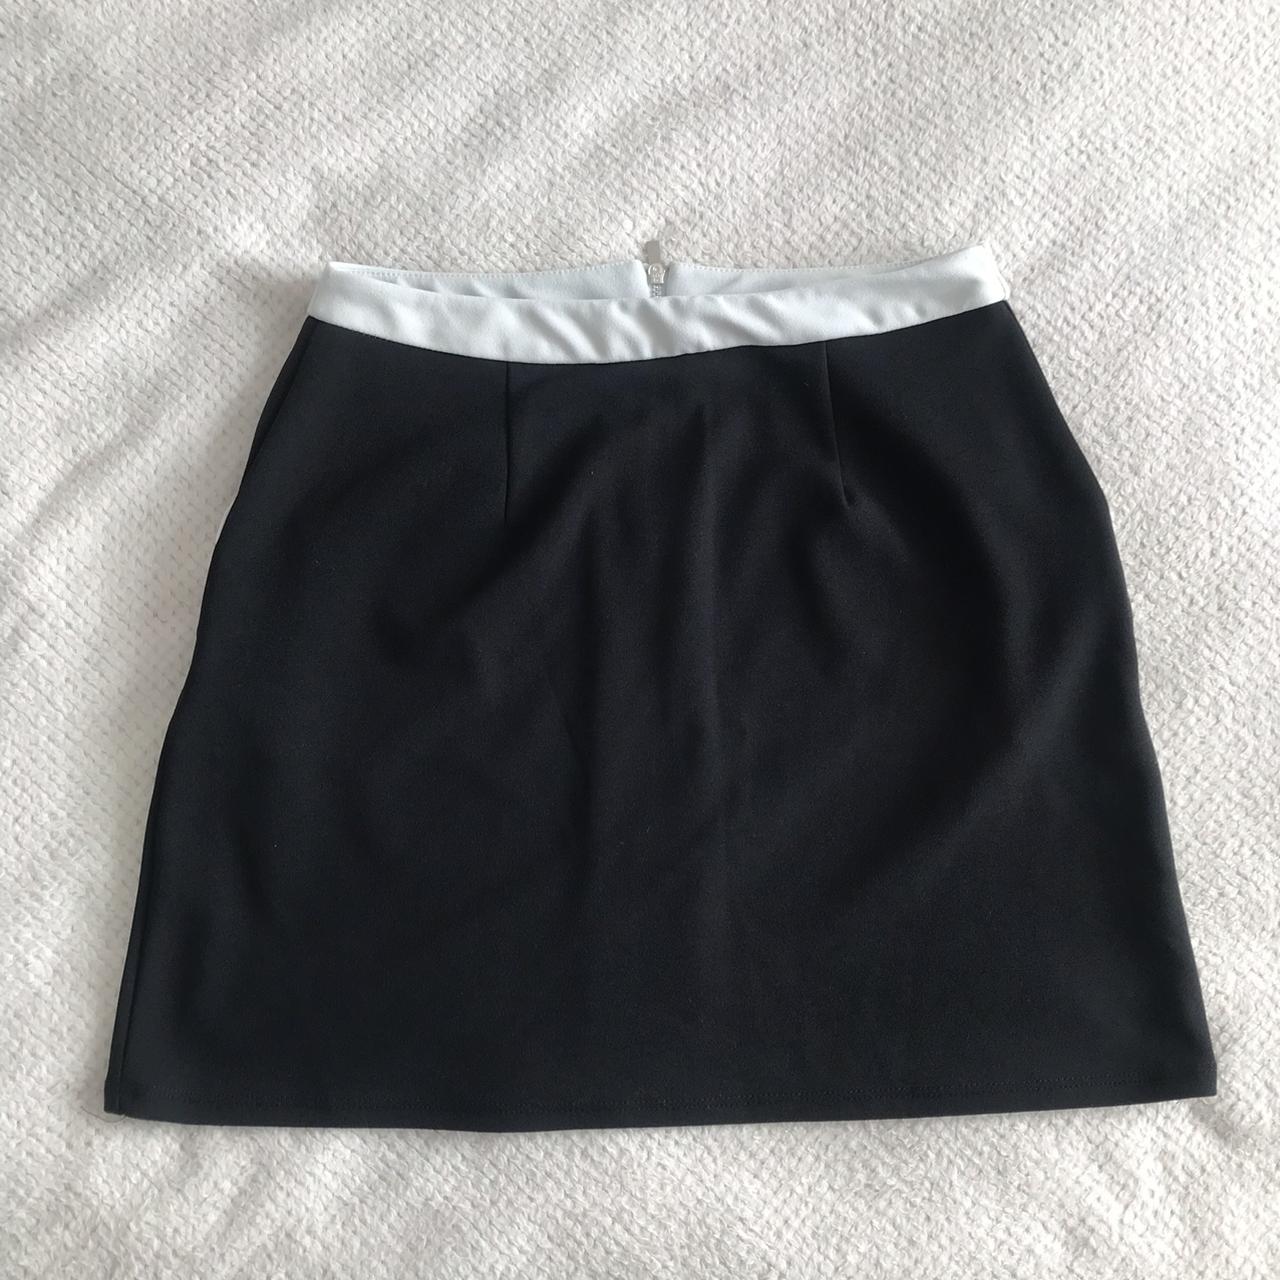 New Look black and white skirt Perfect condition,... - Depop